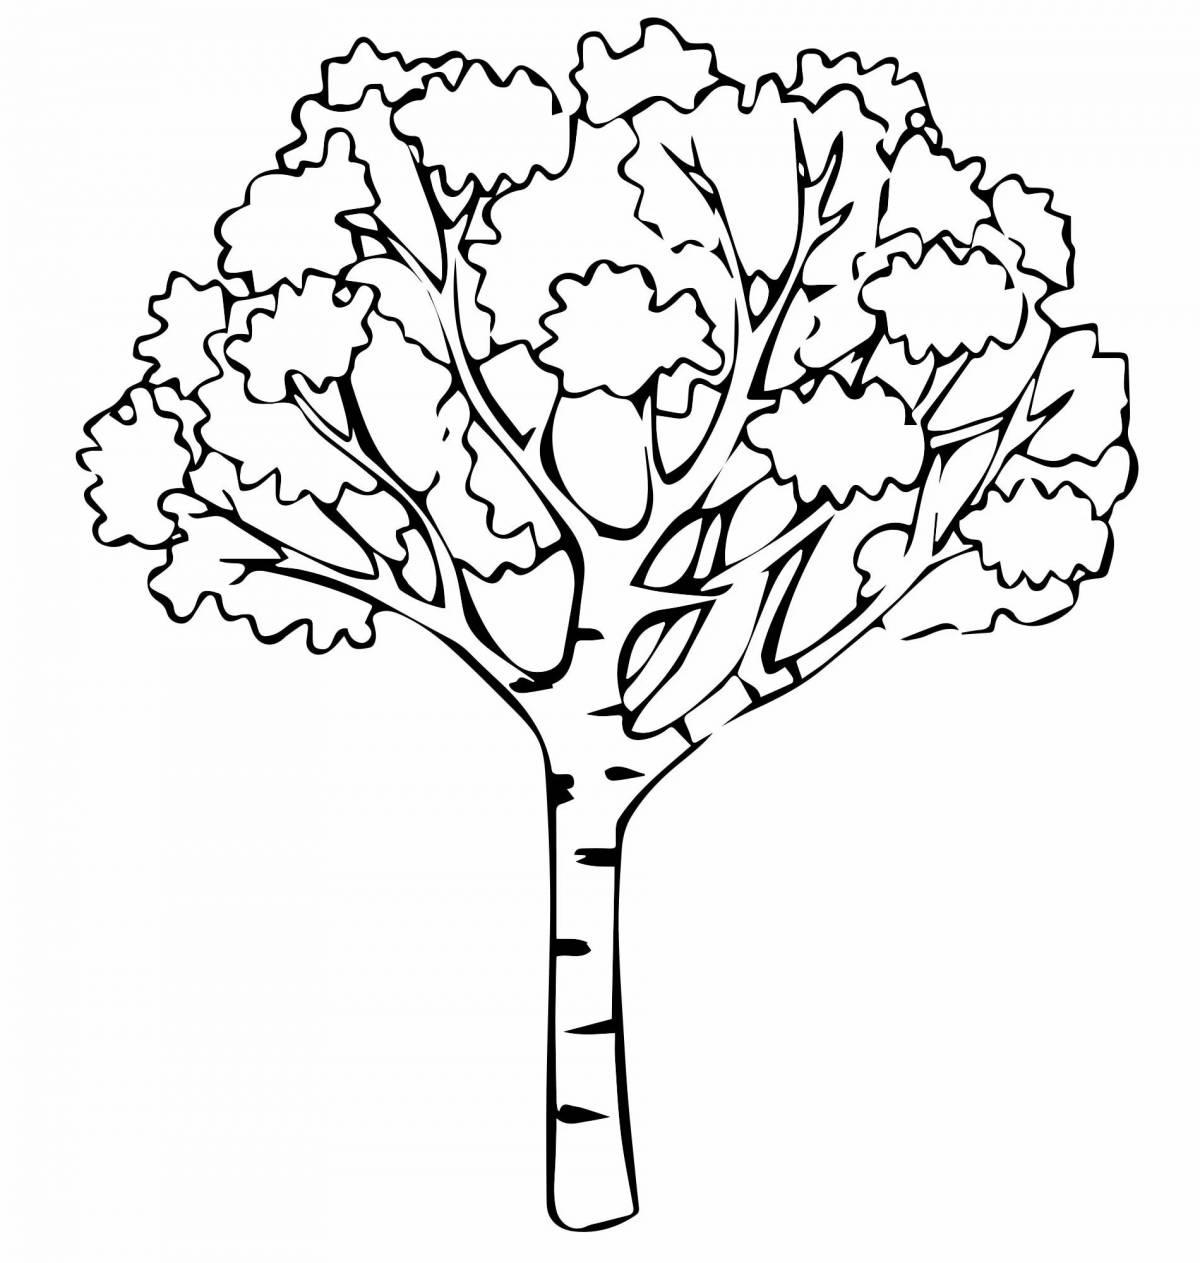 Glitzy tree coloring page for 4-5 year olds